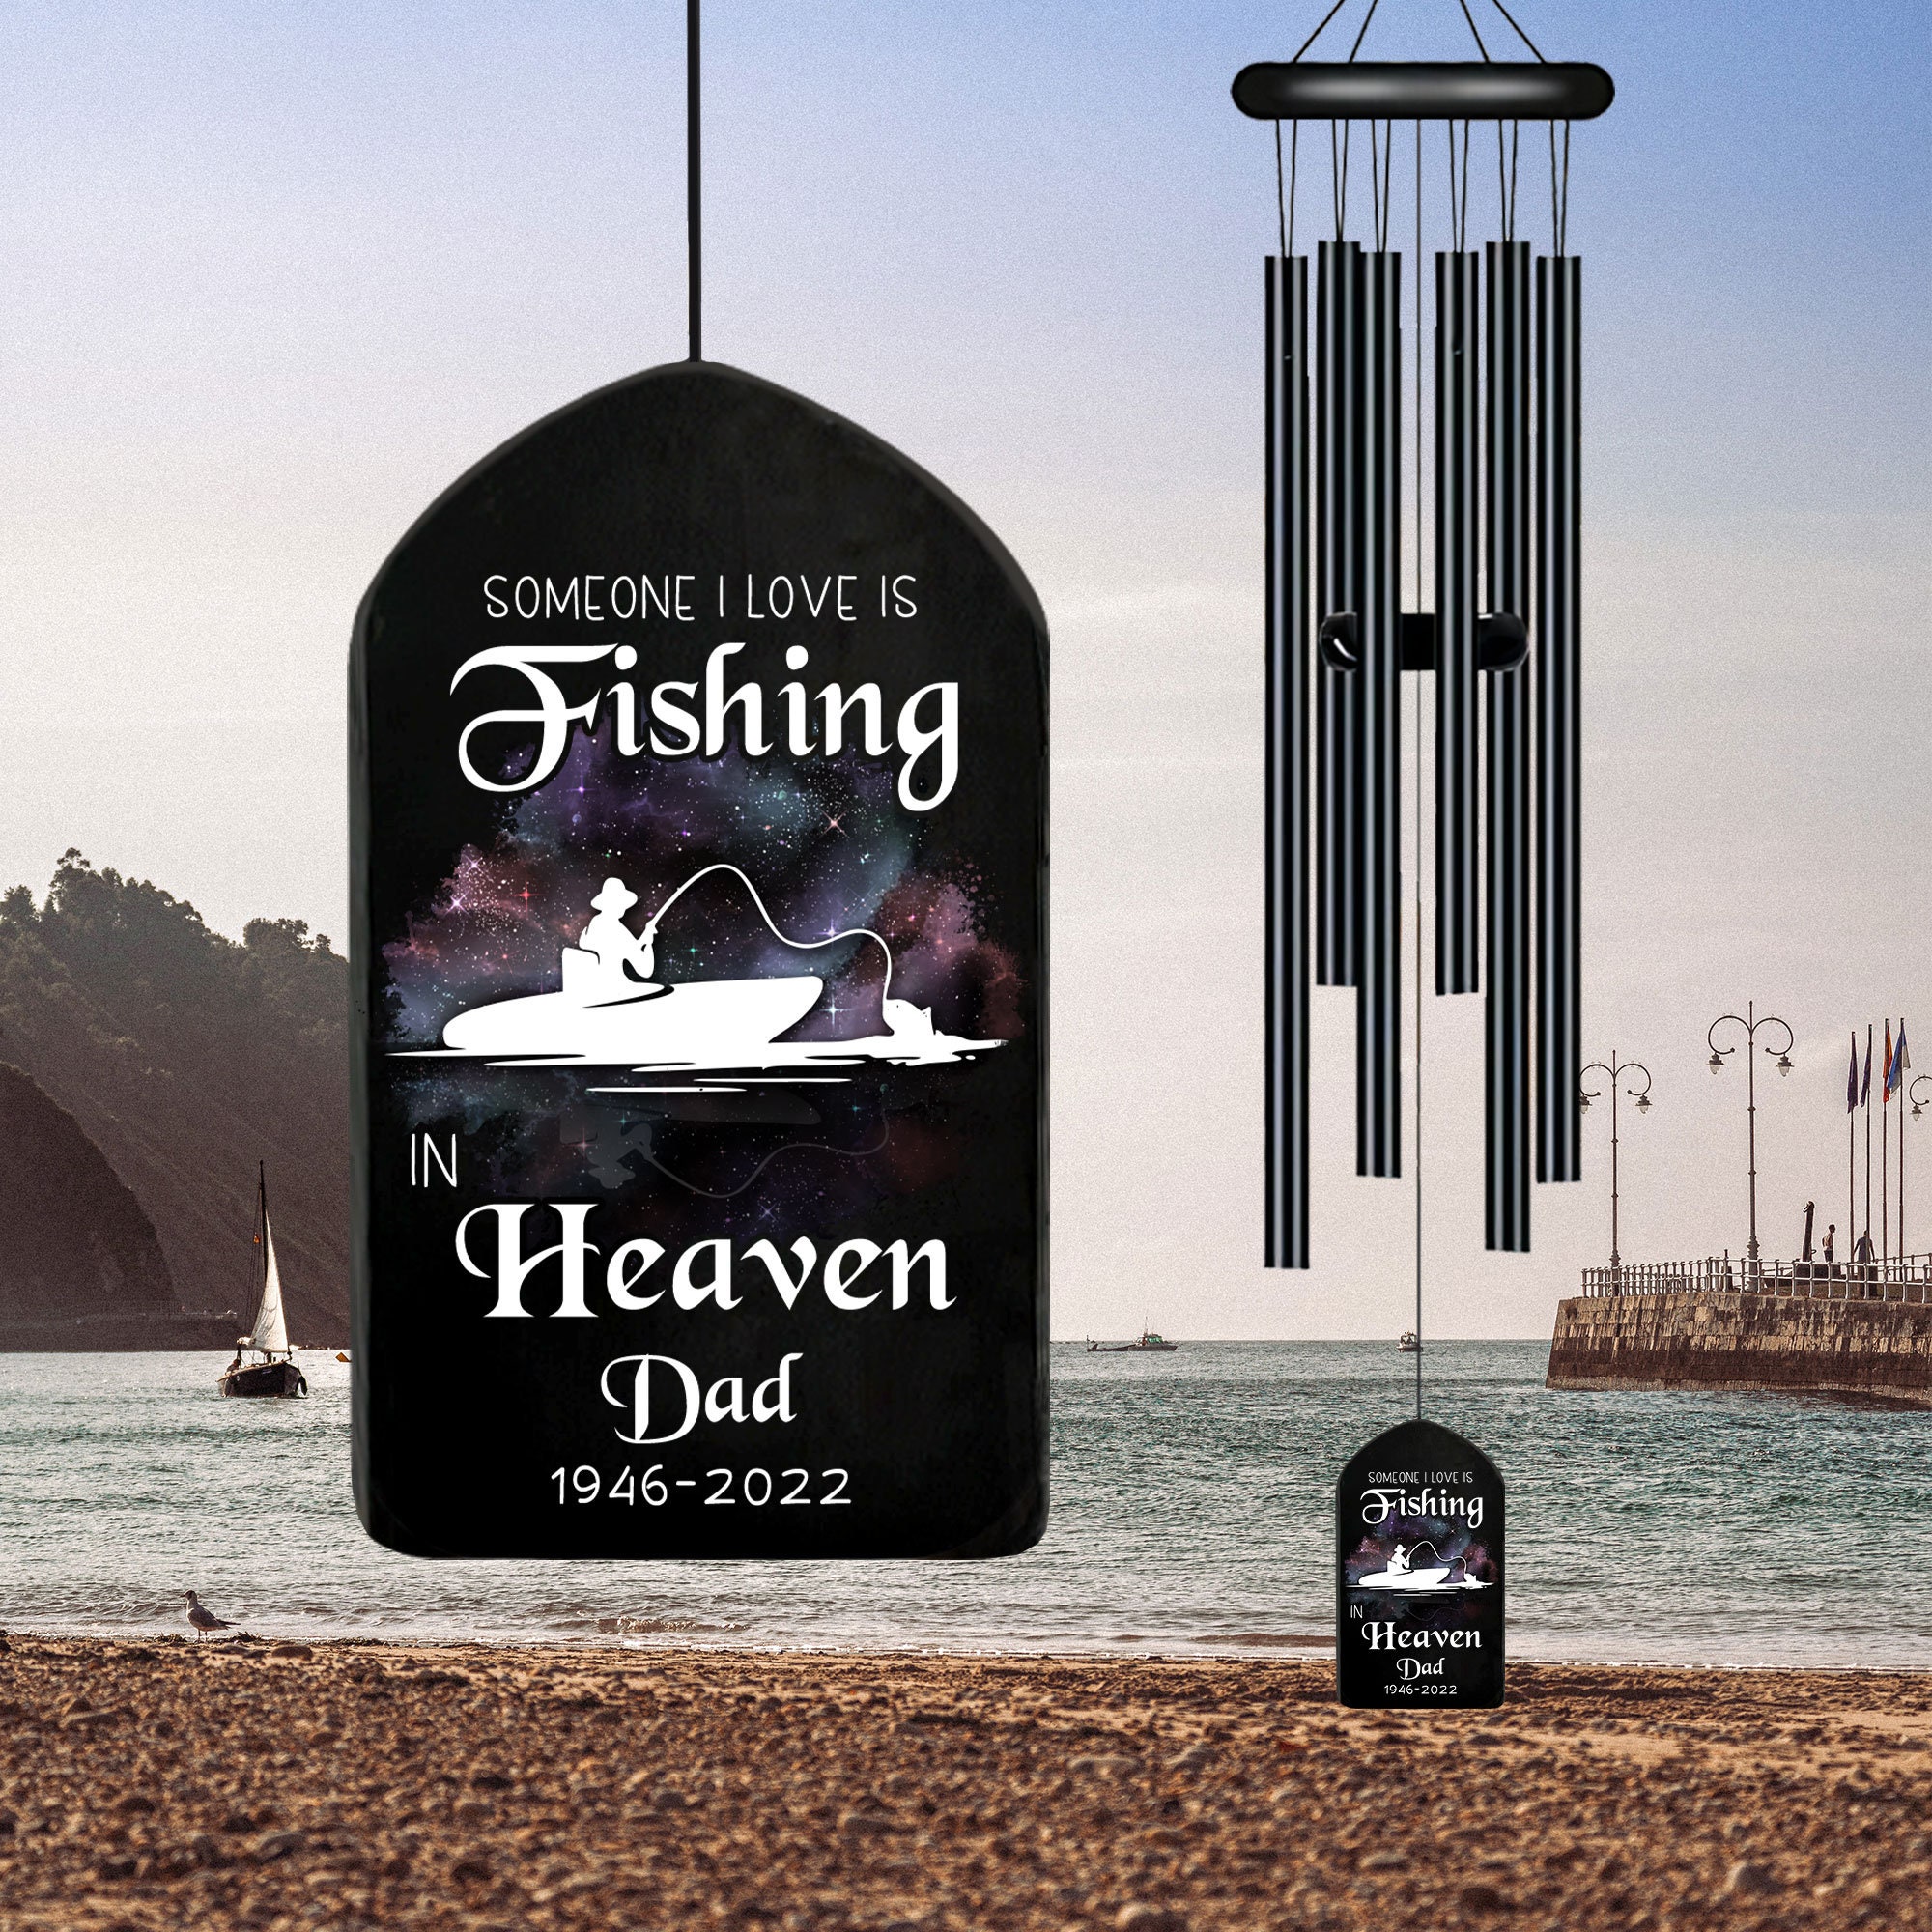 Windchime Riding in Heaven Sails 